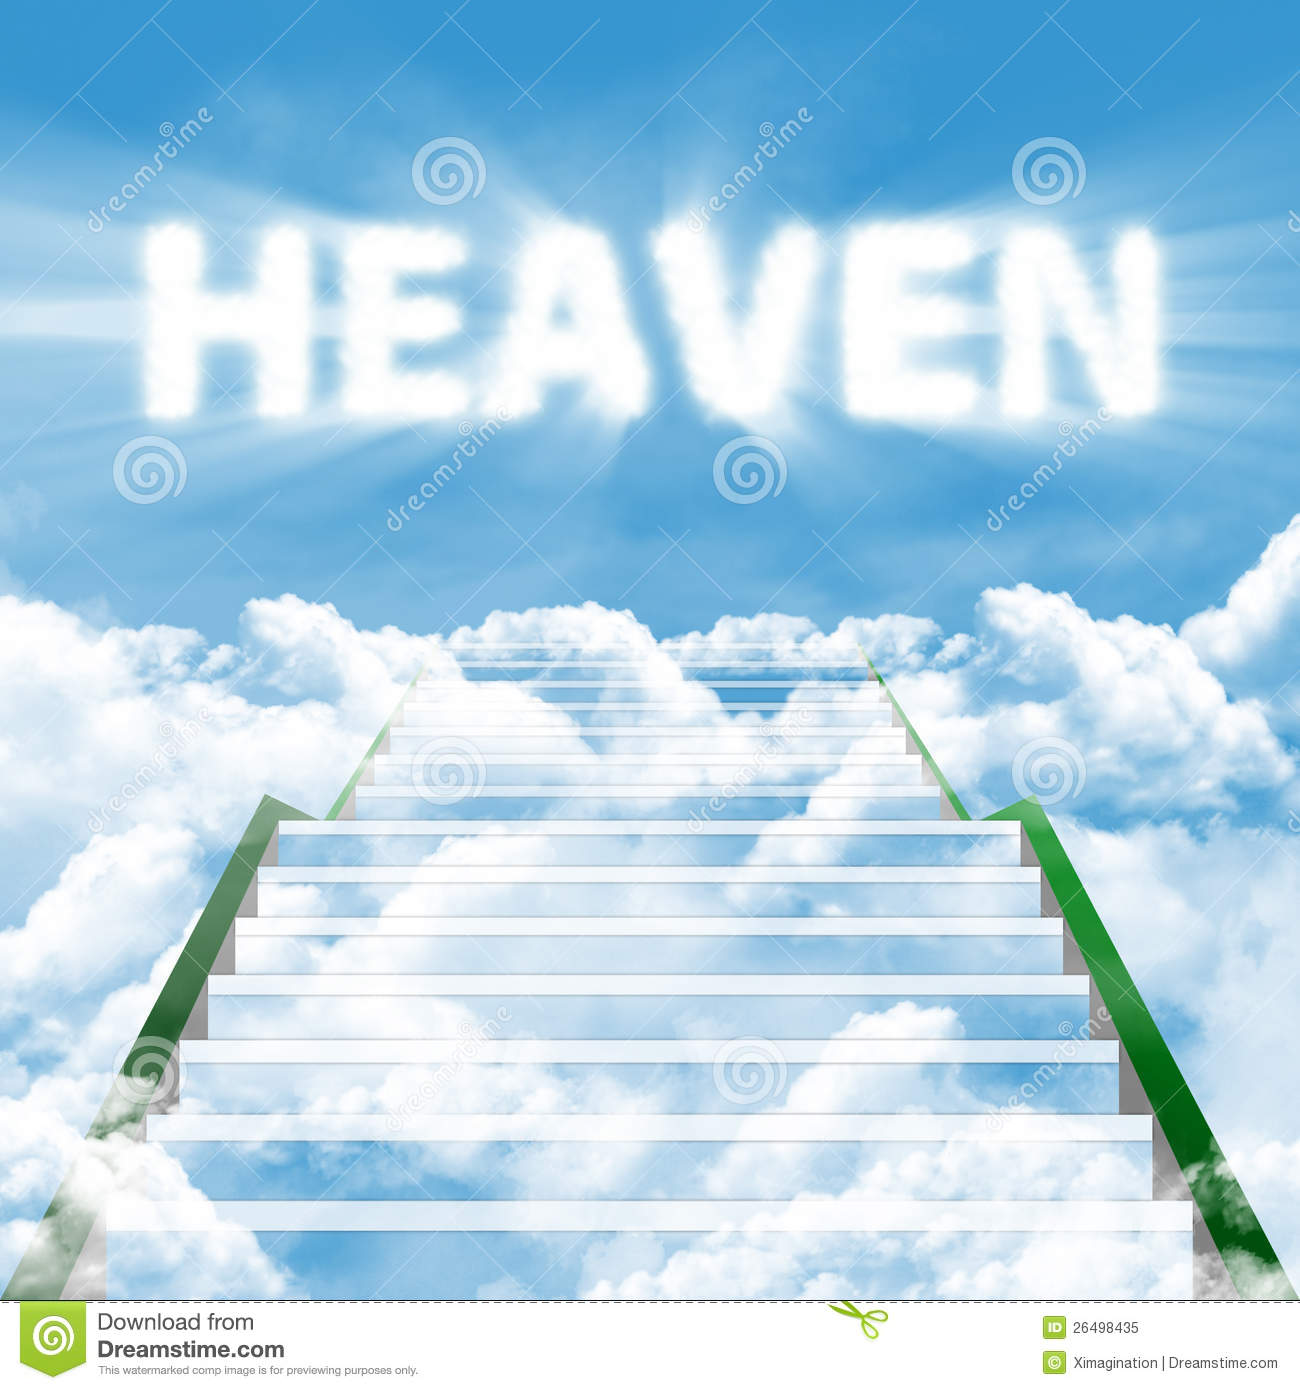 Heaven Clipart Free Ladder Of - Clipart Heaven